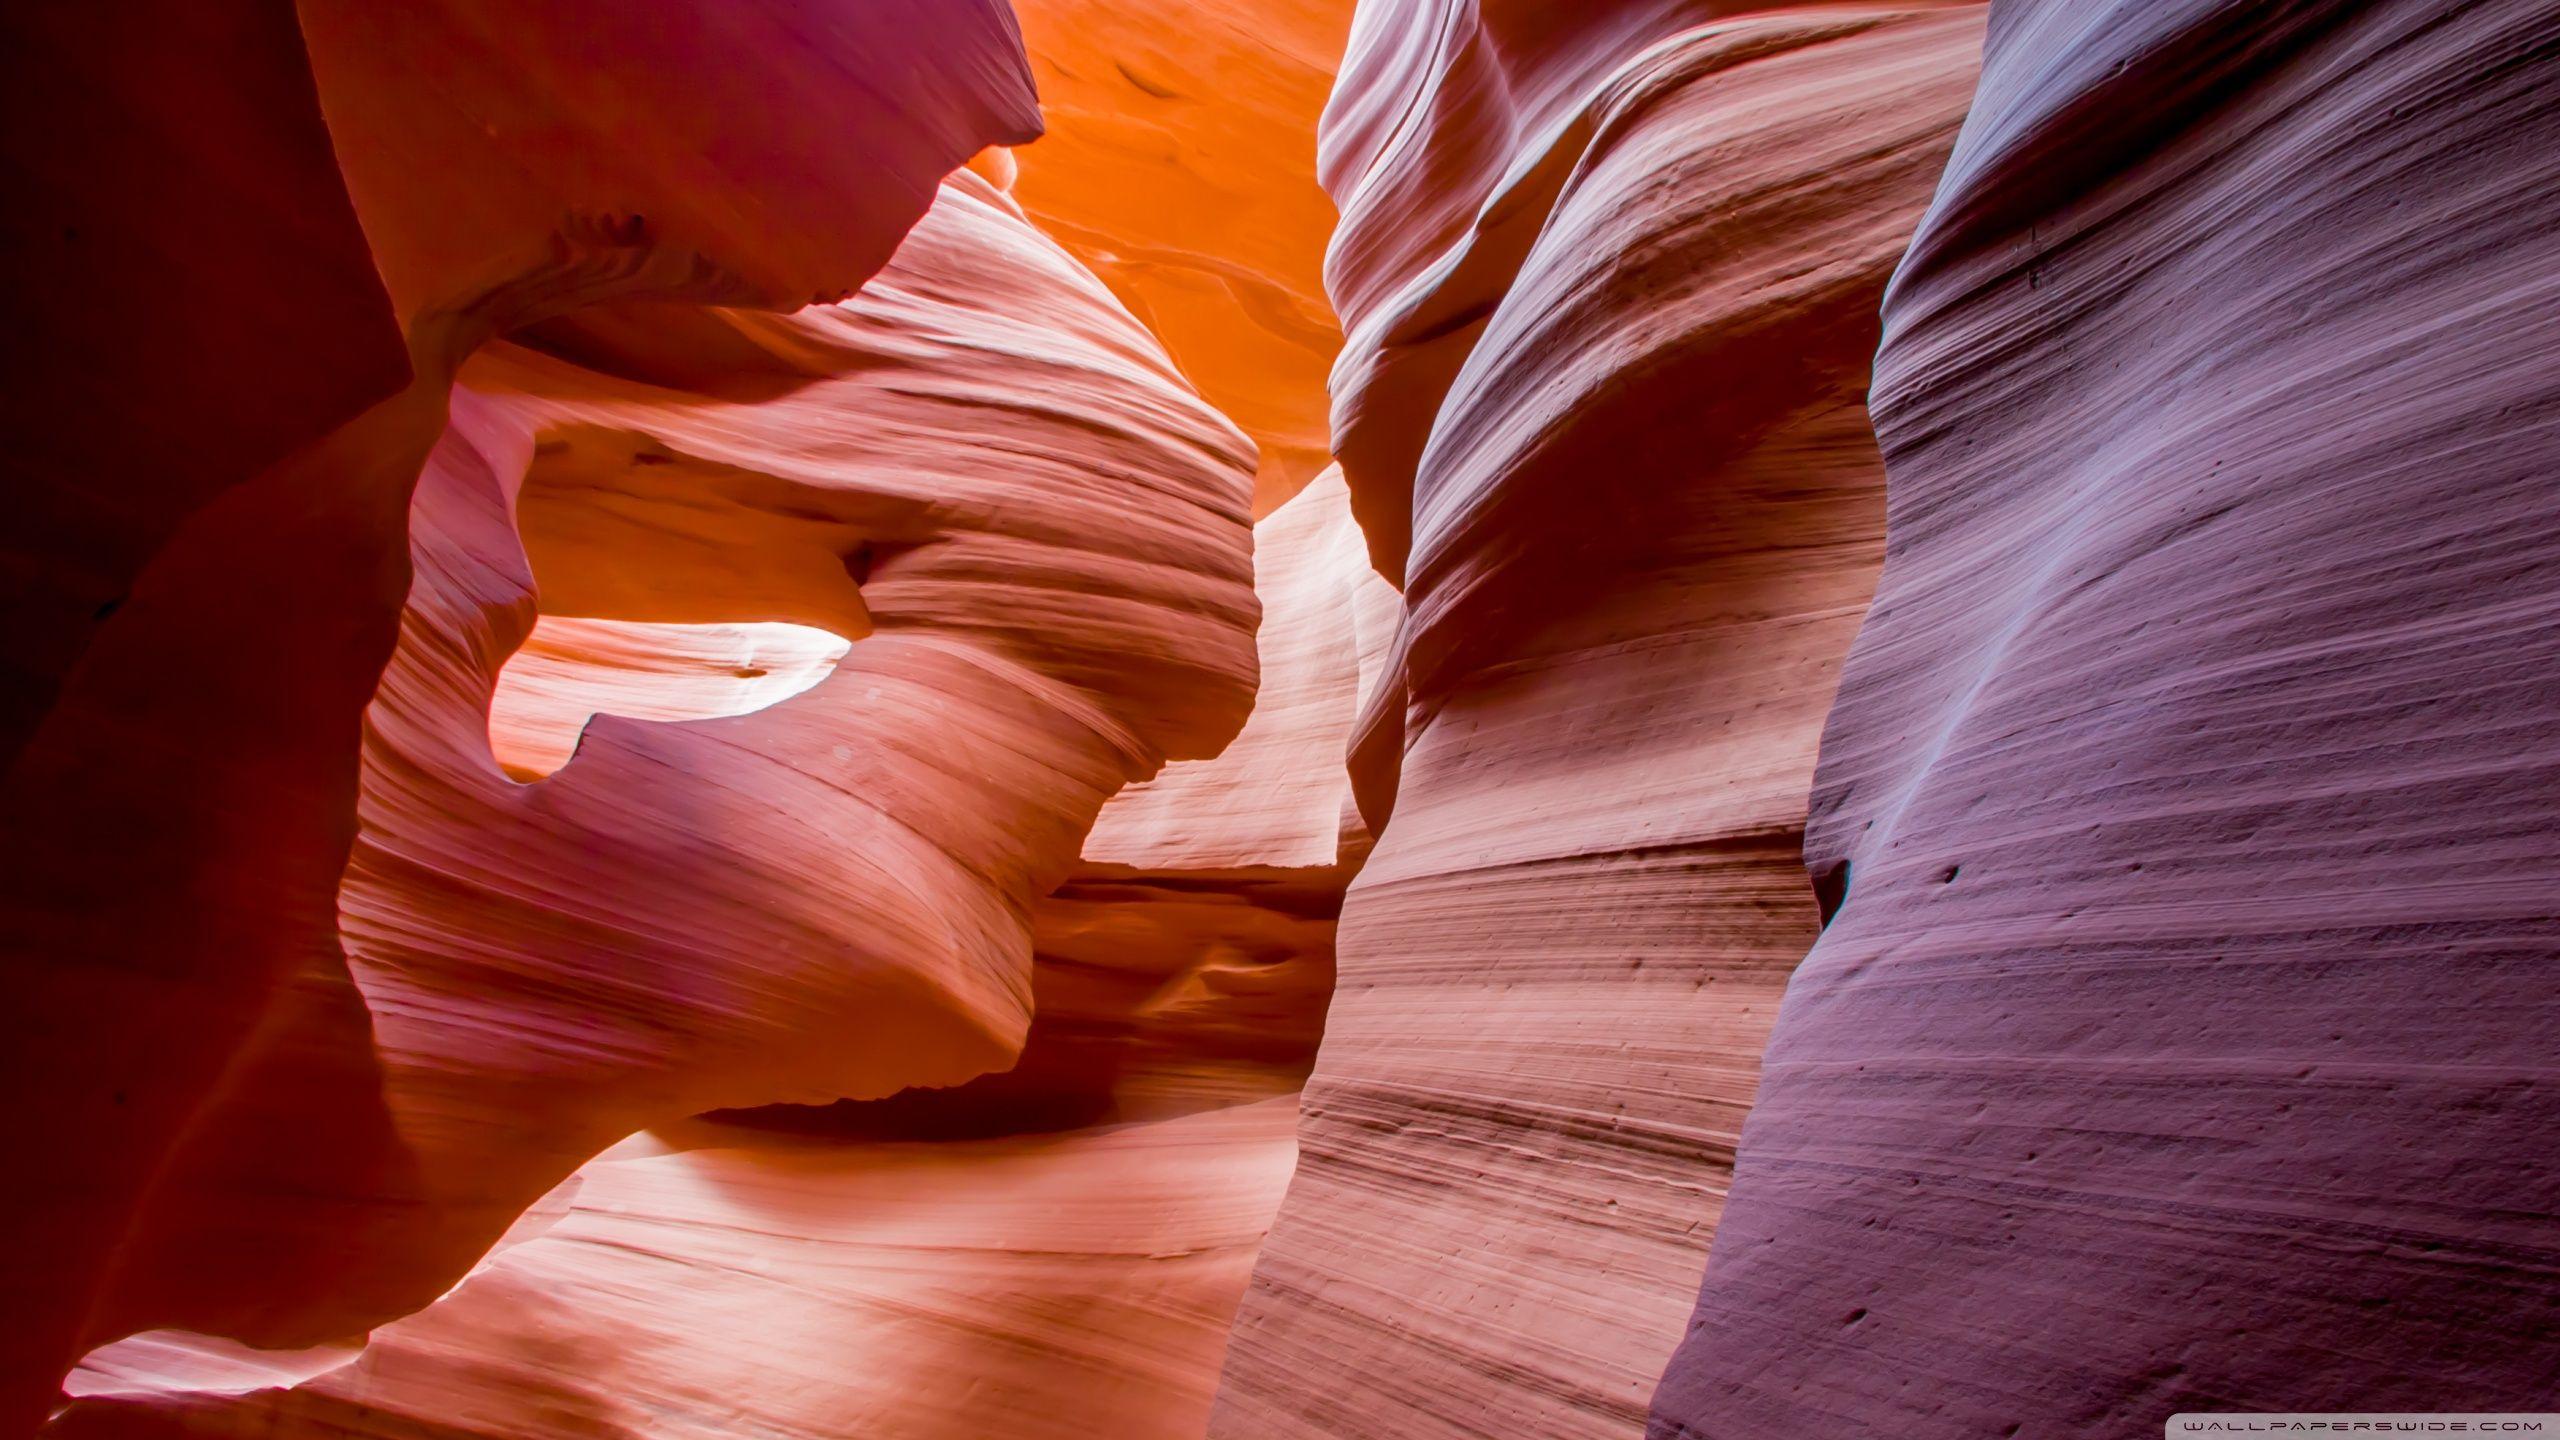 IPhone 11 Antelope Canyon  iPhoneography HD phone wallpaper  Pxfuel